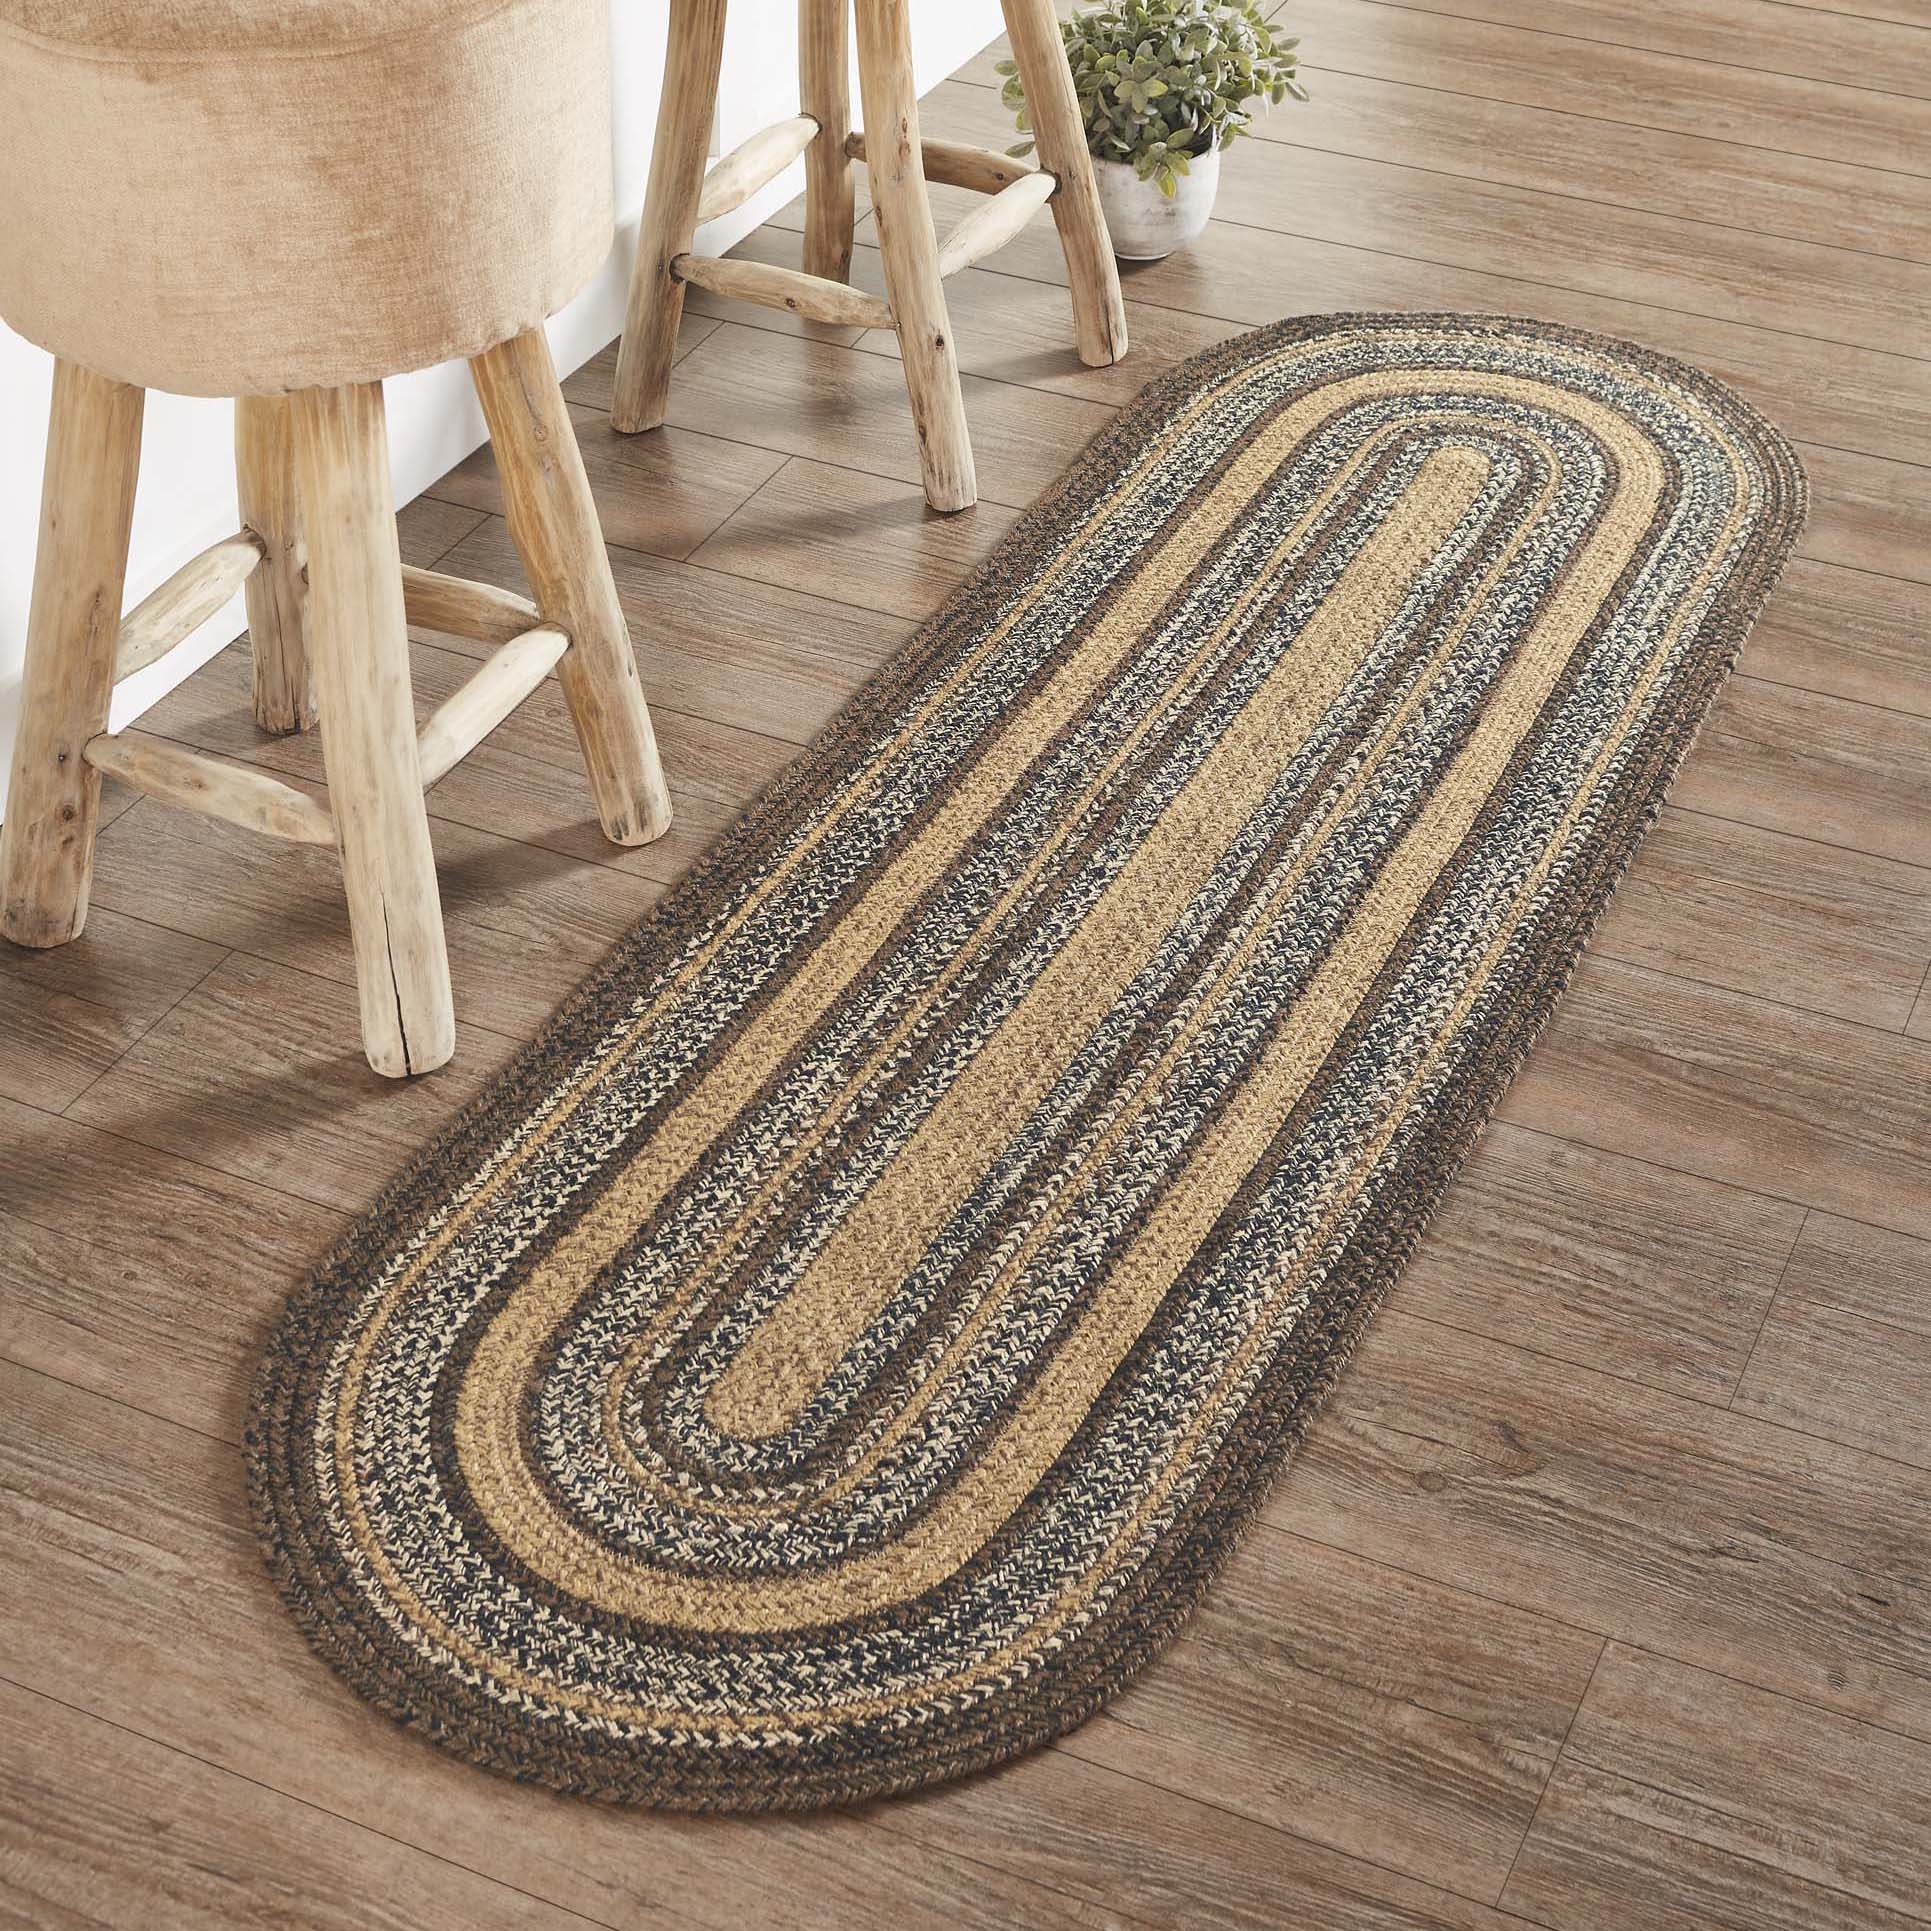 Espresso Jute Braided Rug/Runner Oval with Rug Pad 22"x72" VHC Brands